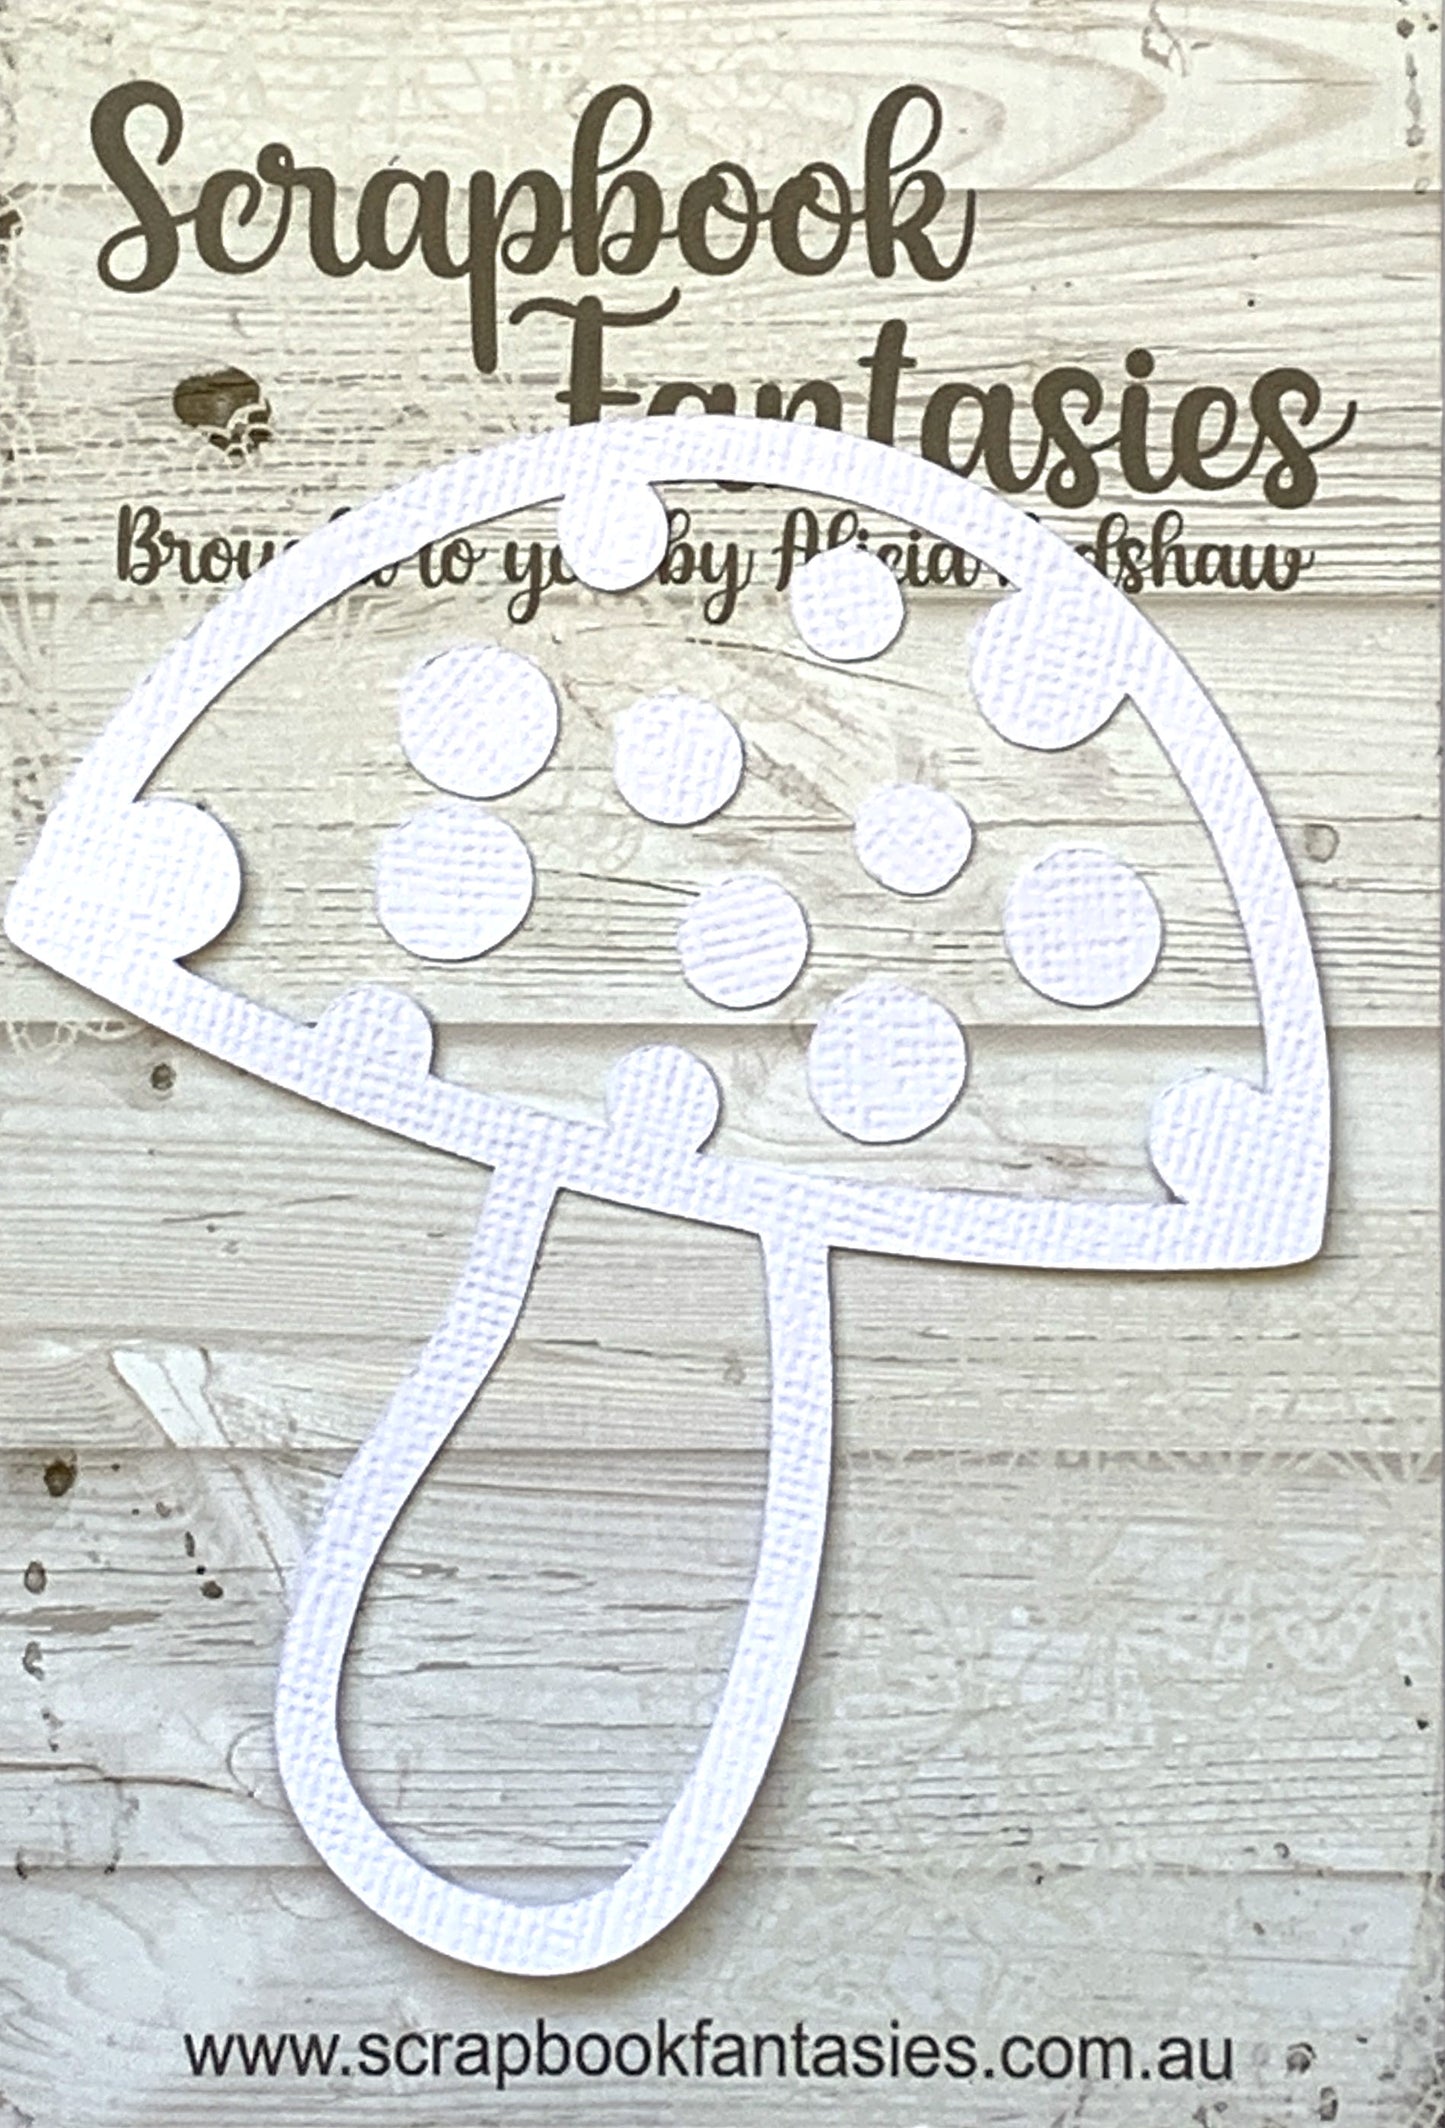 Mushroom (small) 4"x3.5" White Linen Cardstock Cutout - Designed by Alicia Redshaw